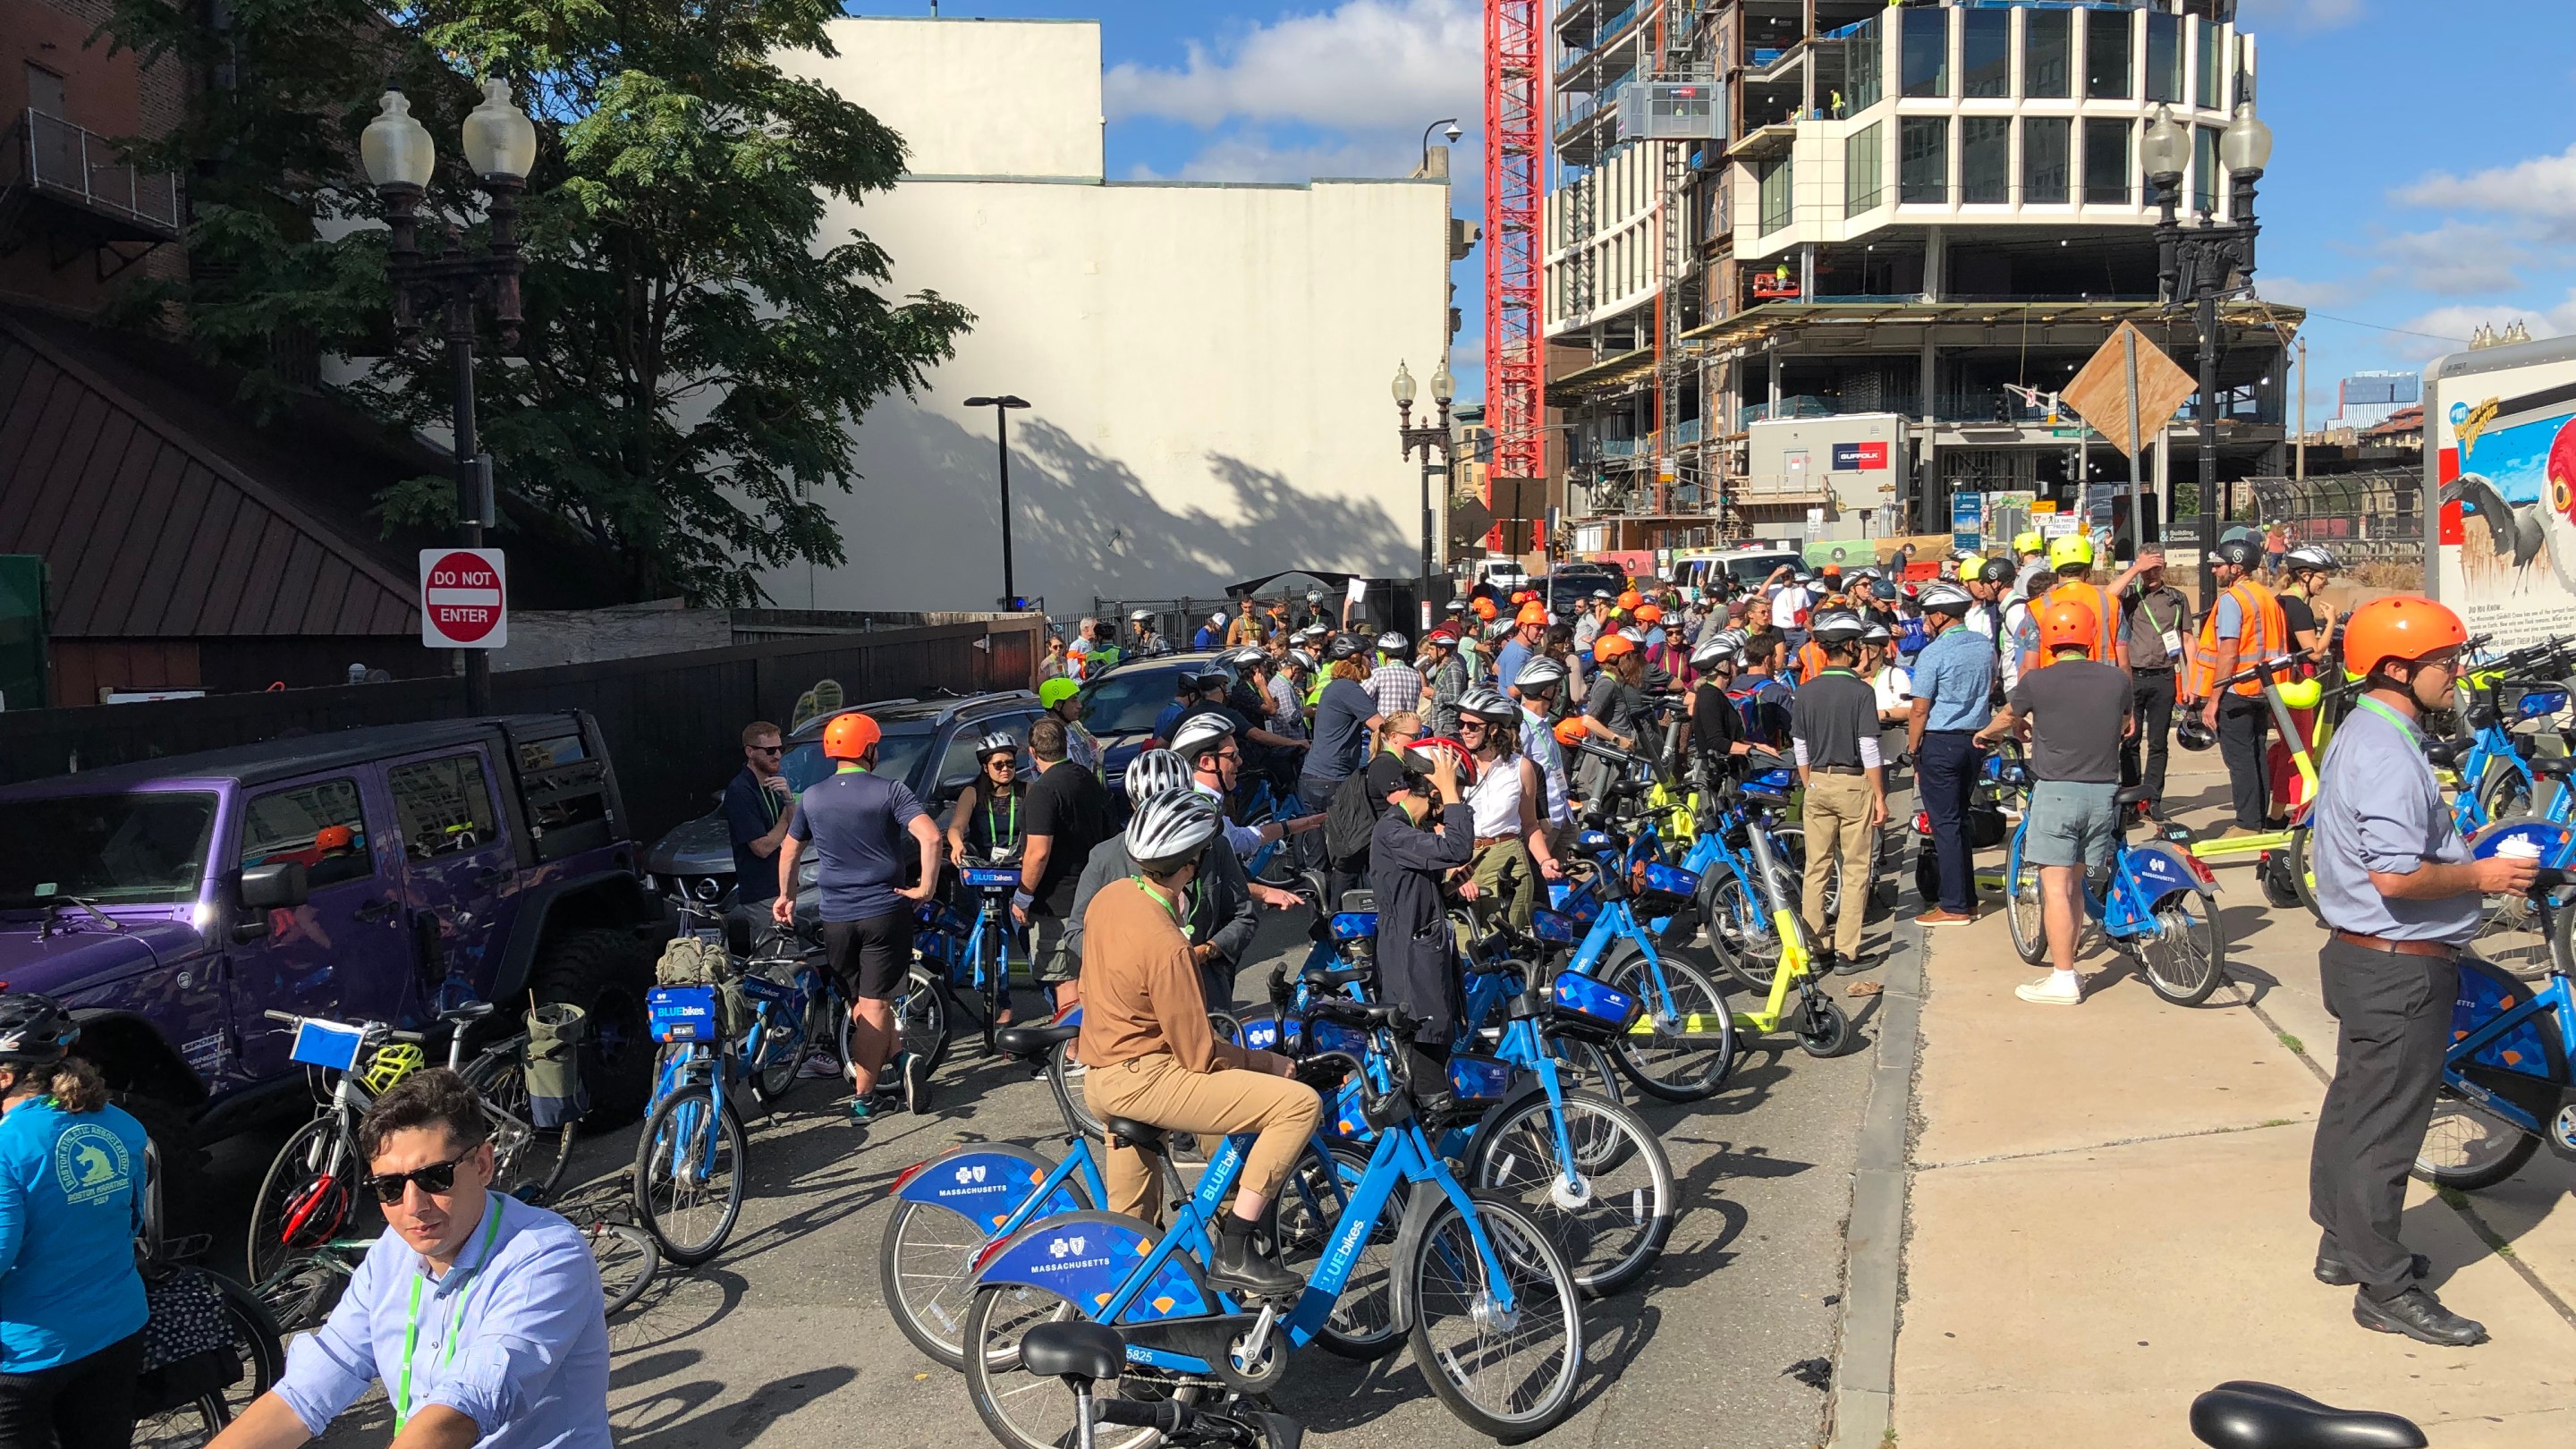 A crowd of people and Bluebikes gathers near Boylston Street